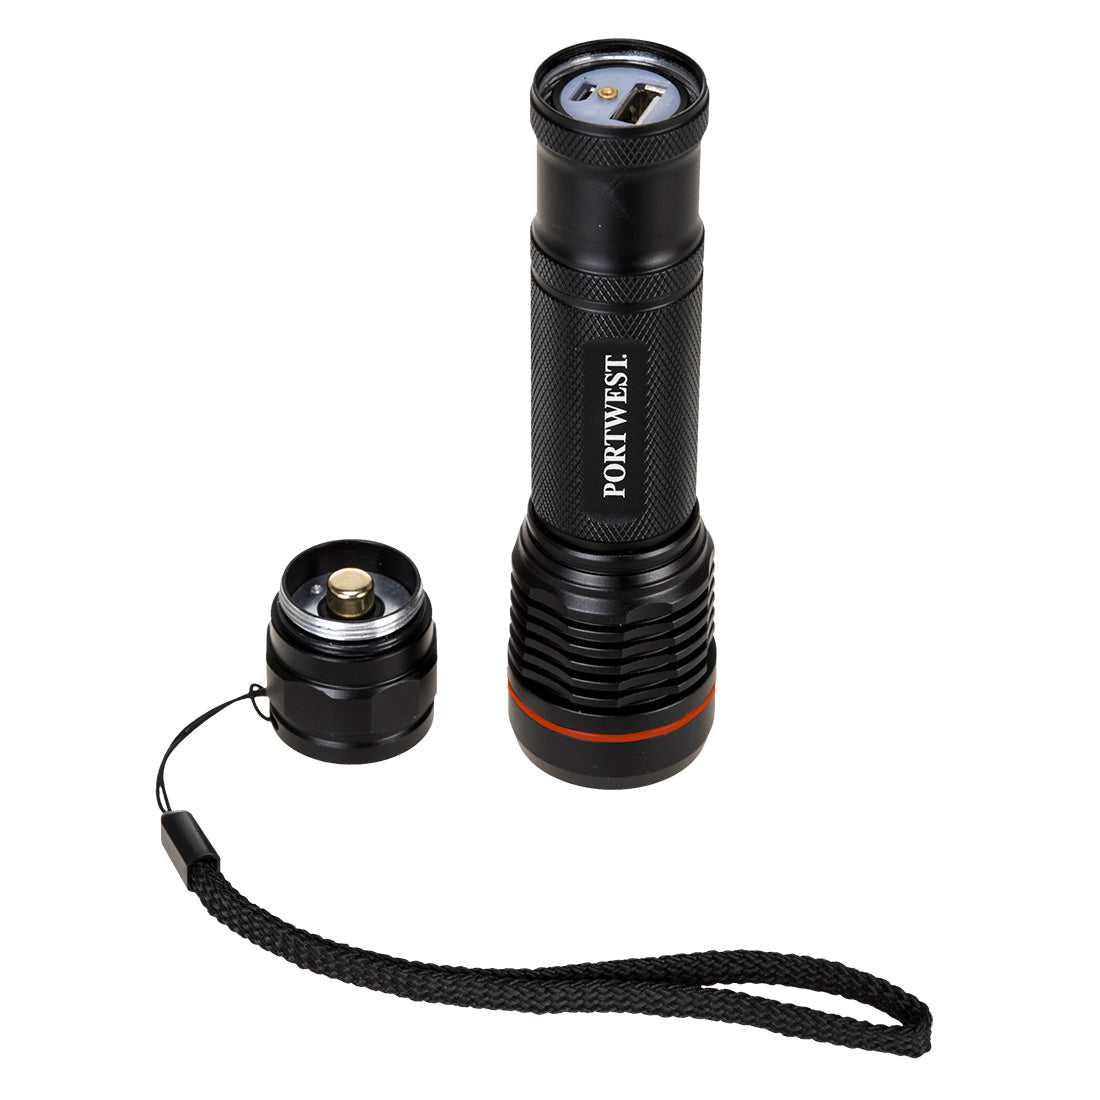 Black open USB Rechargeable Torch - PA75